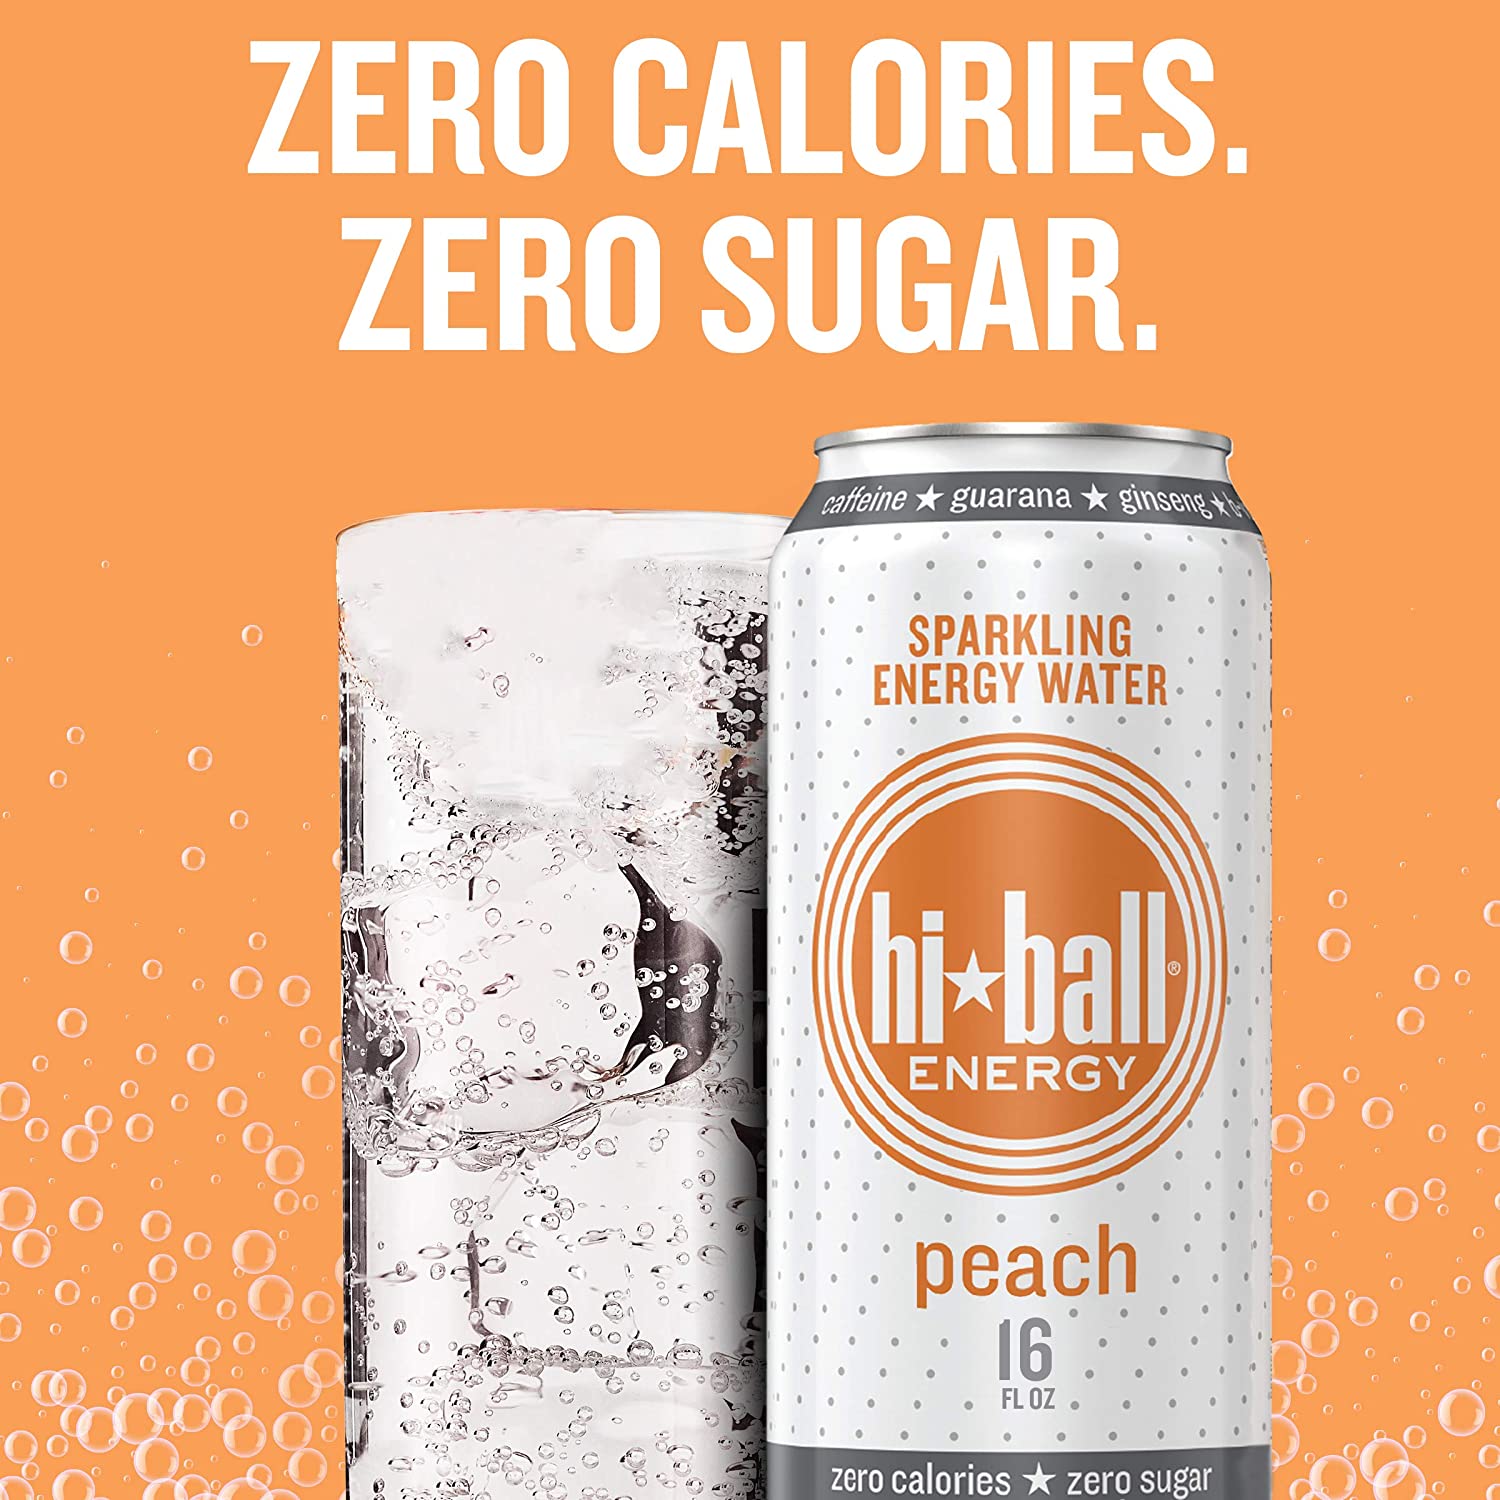 Hiball Clean Energy Seltzer Water, Caffeinated Sparkling Water Made with Vitamin B12 and Vitamin B6, Sugar Free (8 pack of 16 Fl Oz), Peach